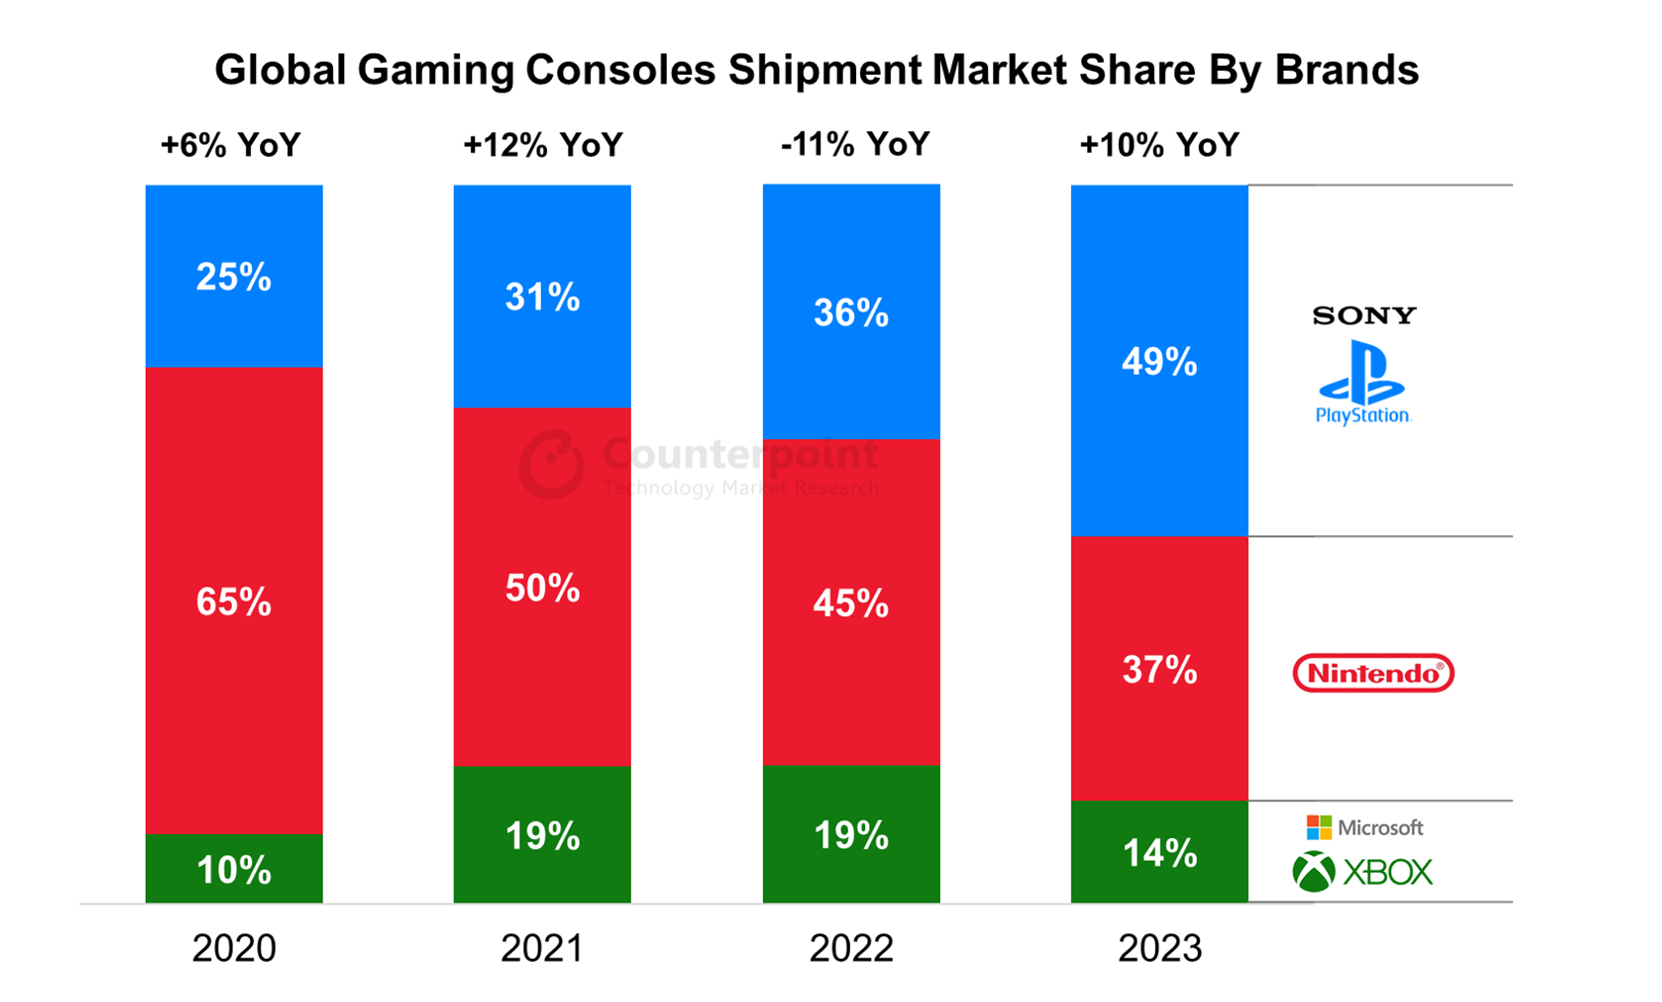 Global gaming consoles shipment market share by brands